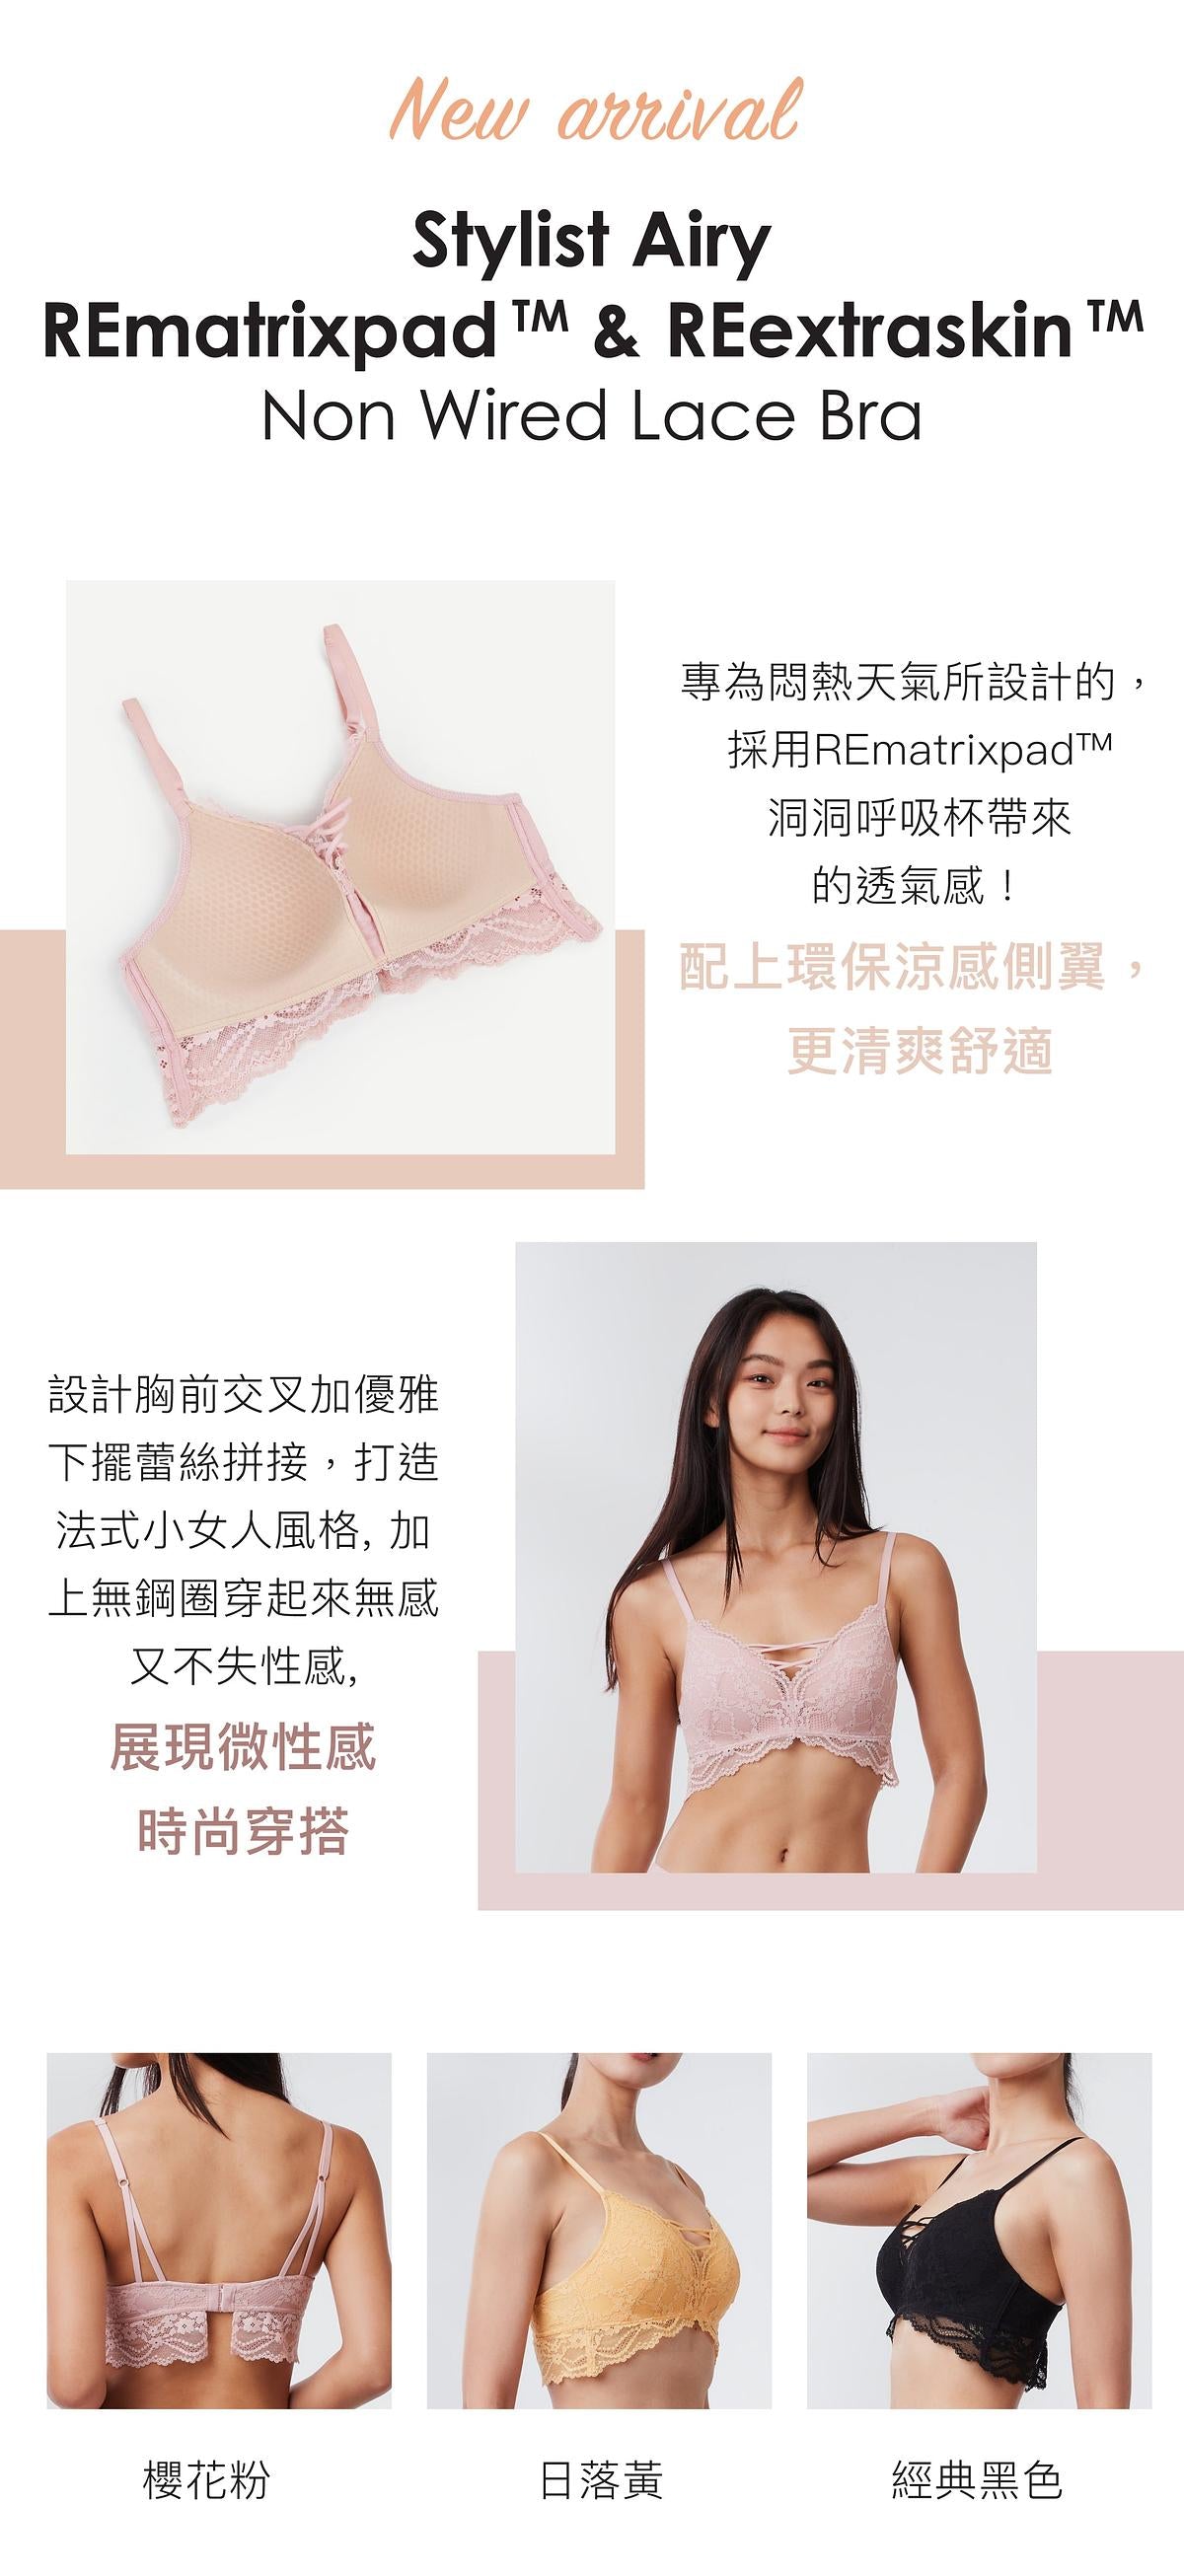 Sustainable (Bra) – Her own words